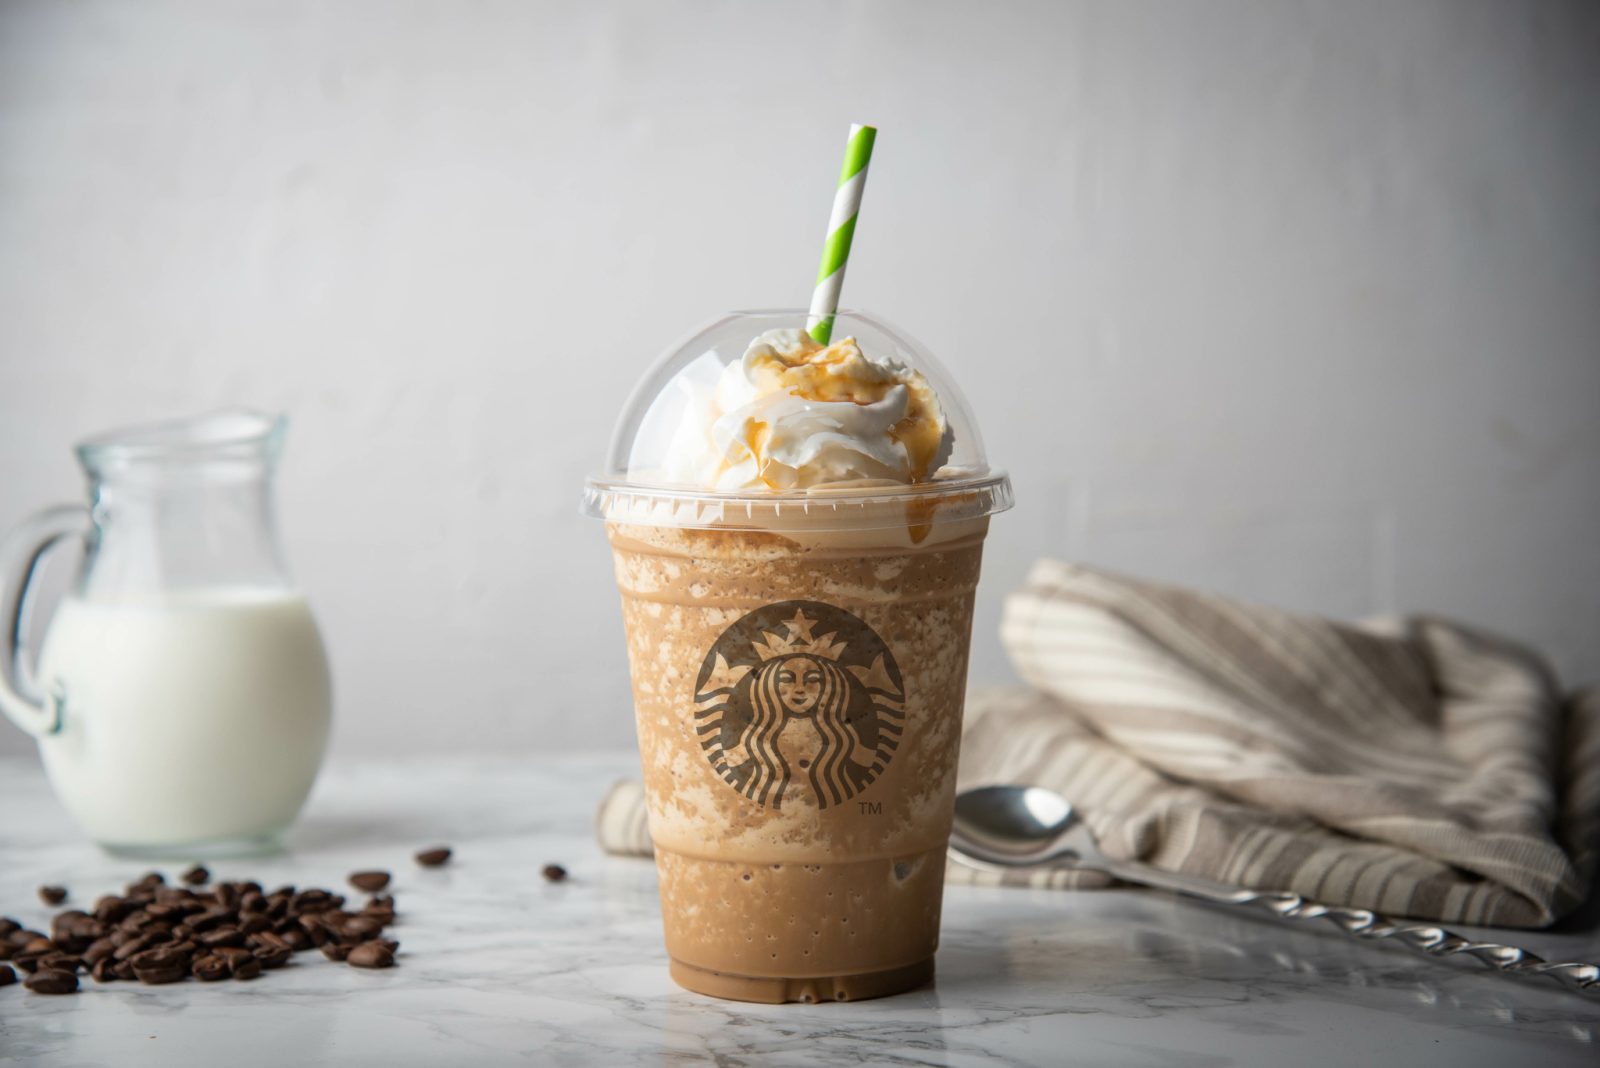 Starbucks Caramel Frappuccino with whipped cream